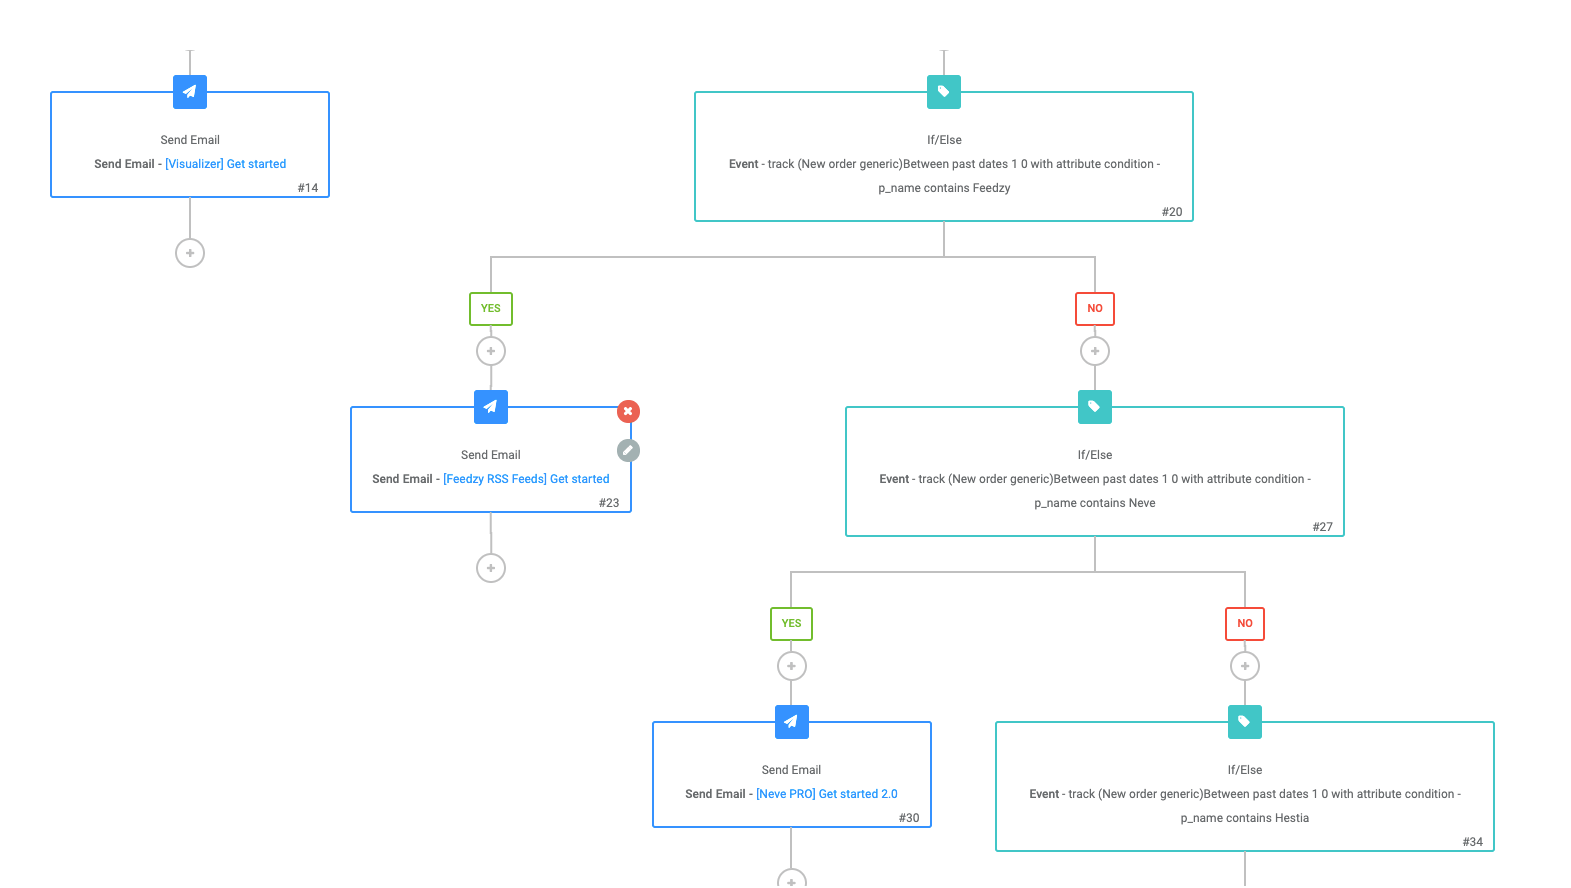 An example of our workflow from our purchasing email marketing strategy